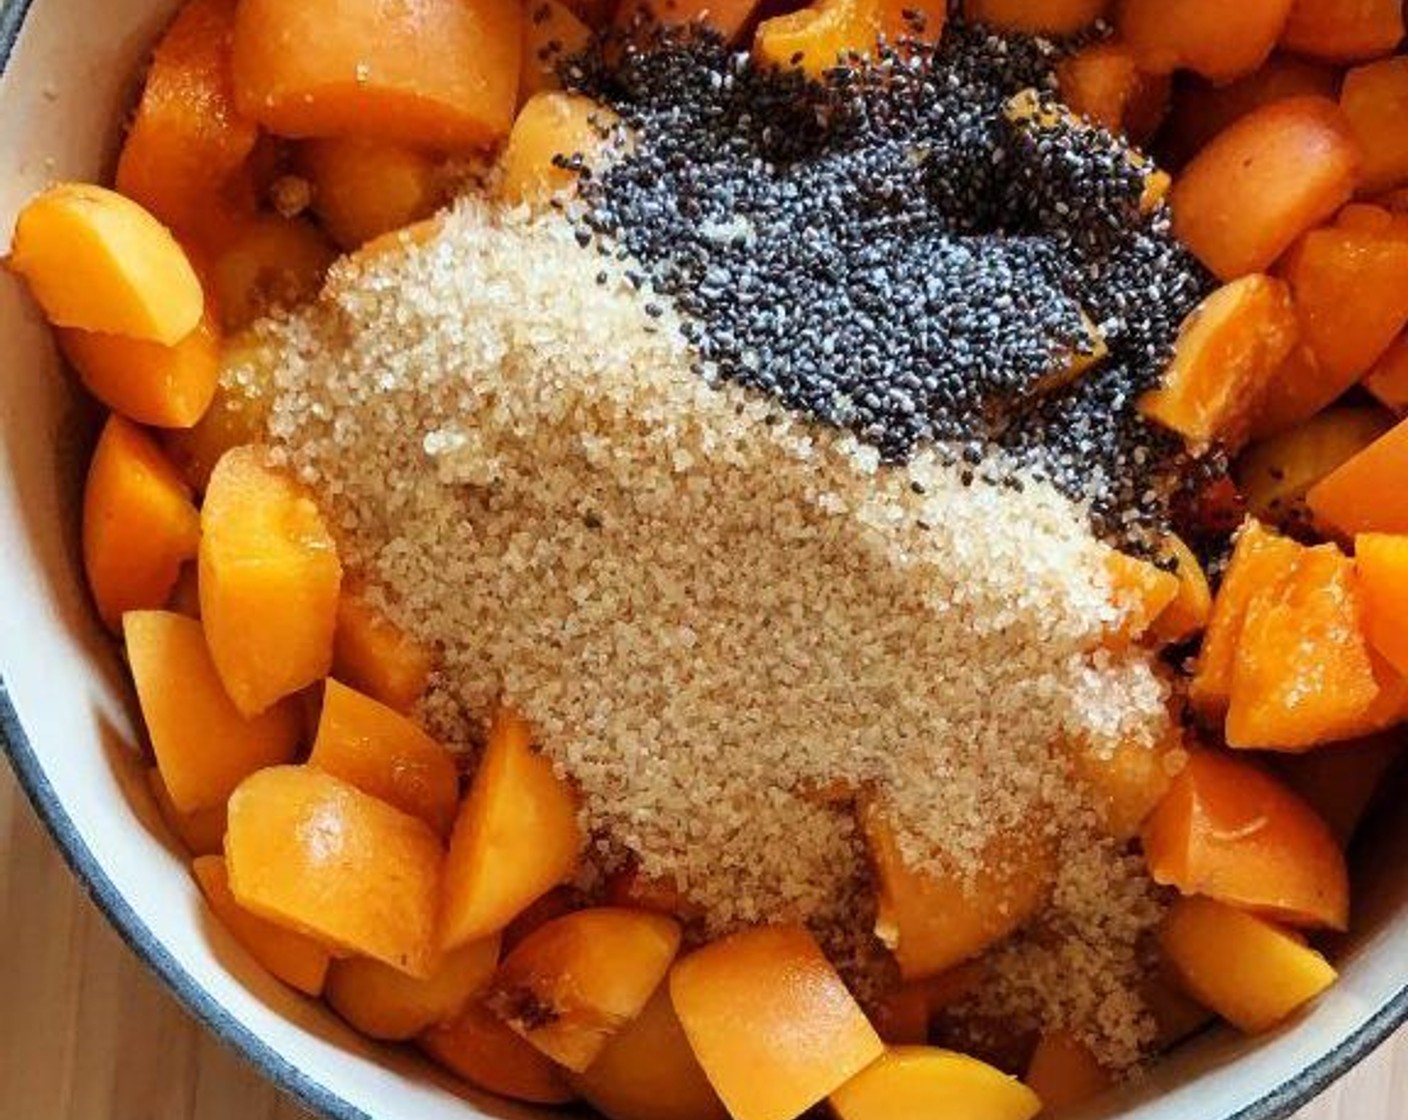 step 1 Add the Apricots (8 cups), Coconut Sugar (3/4 cup) and Chia Seeds (2 Tbsp) to a pot. Cover with a lid and bring to a simmer. Stir well and let the fruit cook on low, for a few hours. You do not need to add any water, the fruit will slowly release enough on its own. As it starts to get thicker, stir more often to avoid it to stick at the bottom of the pan.